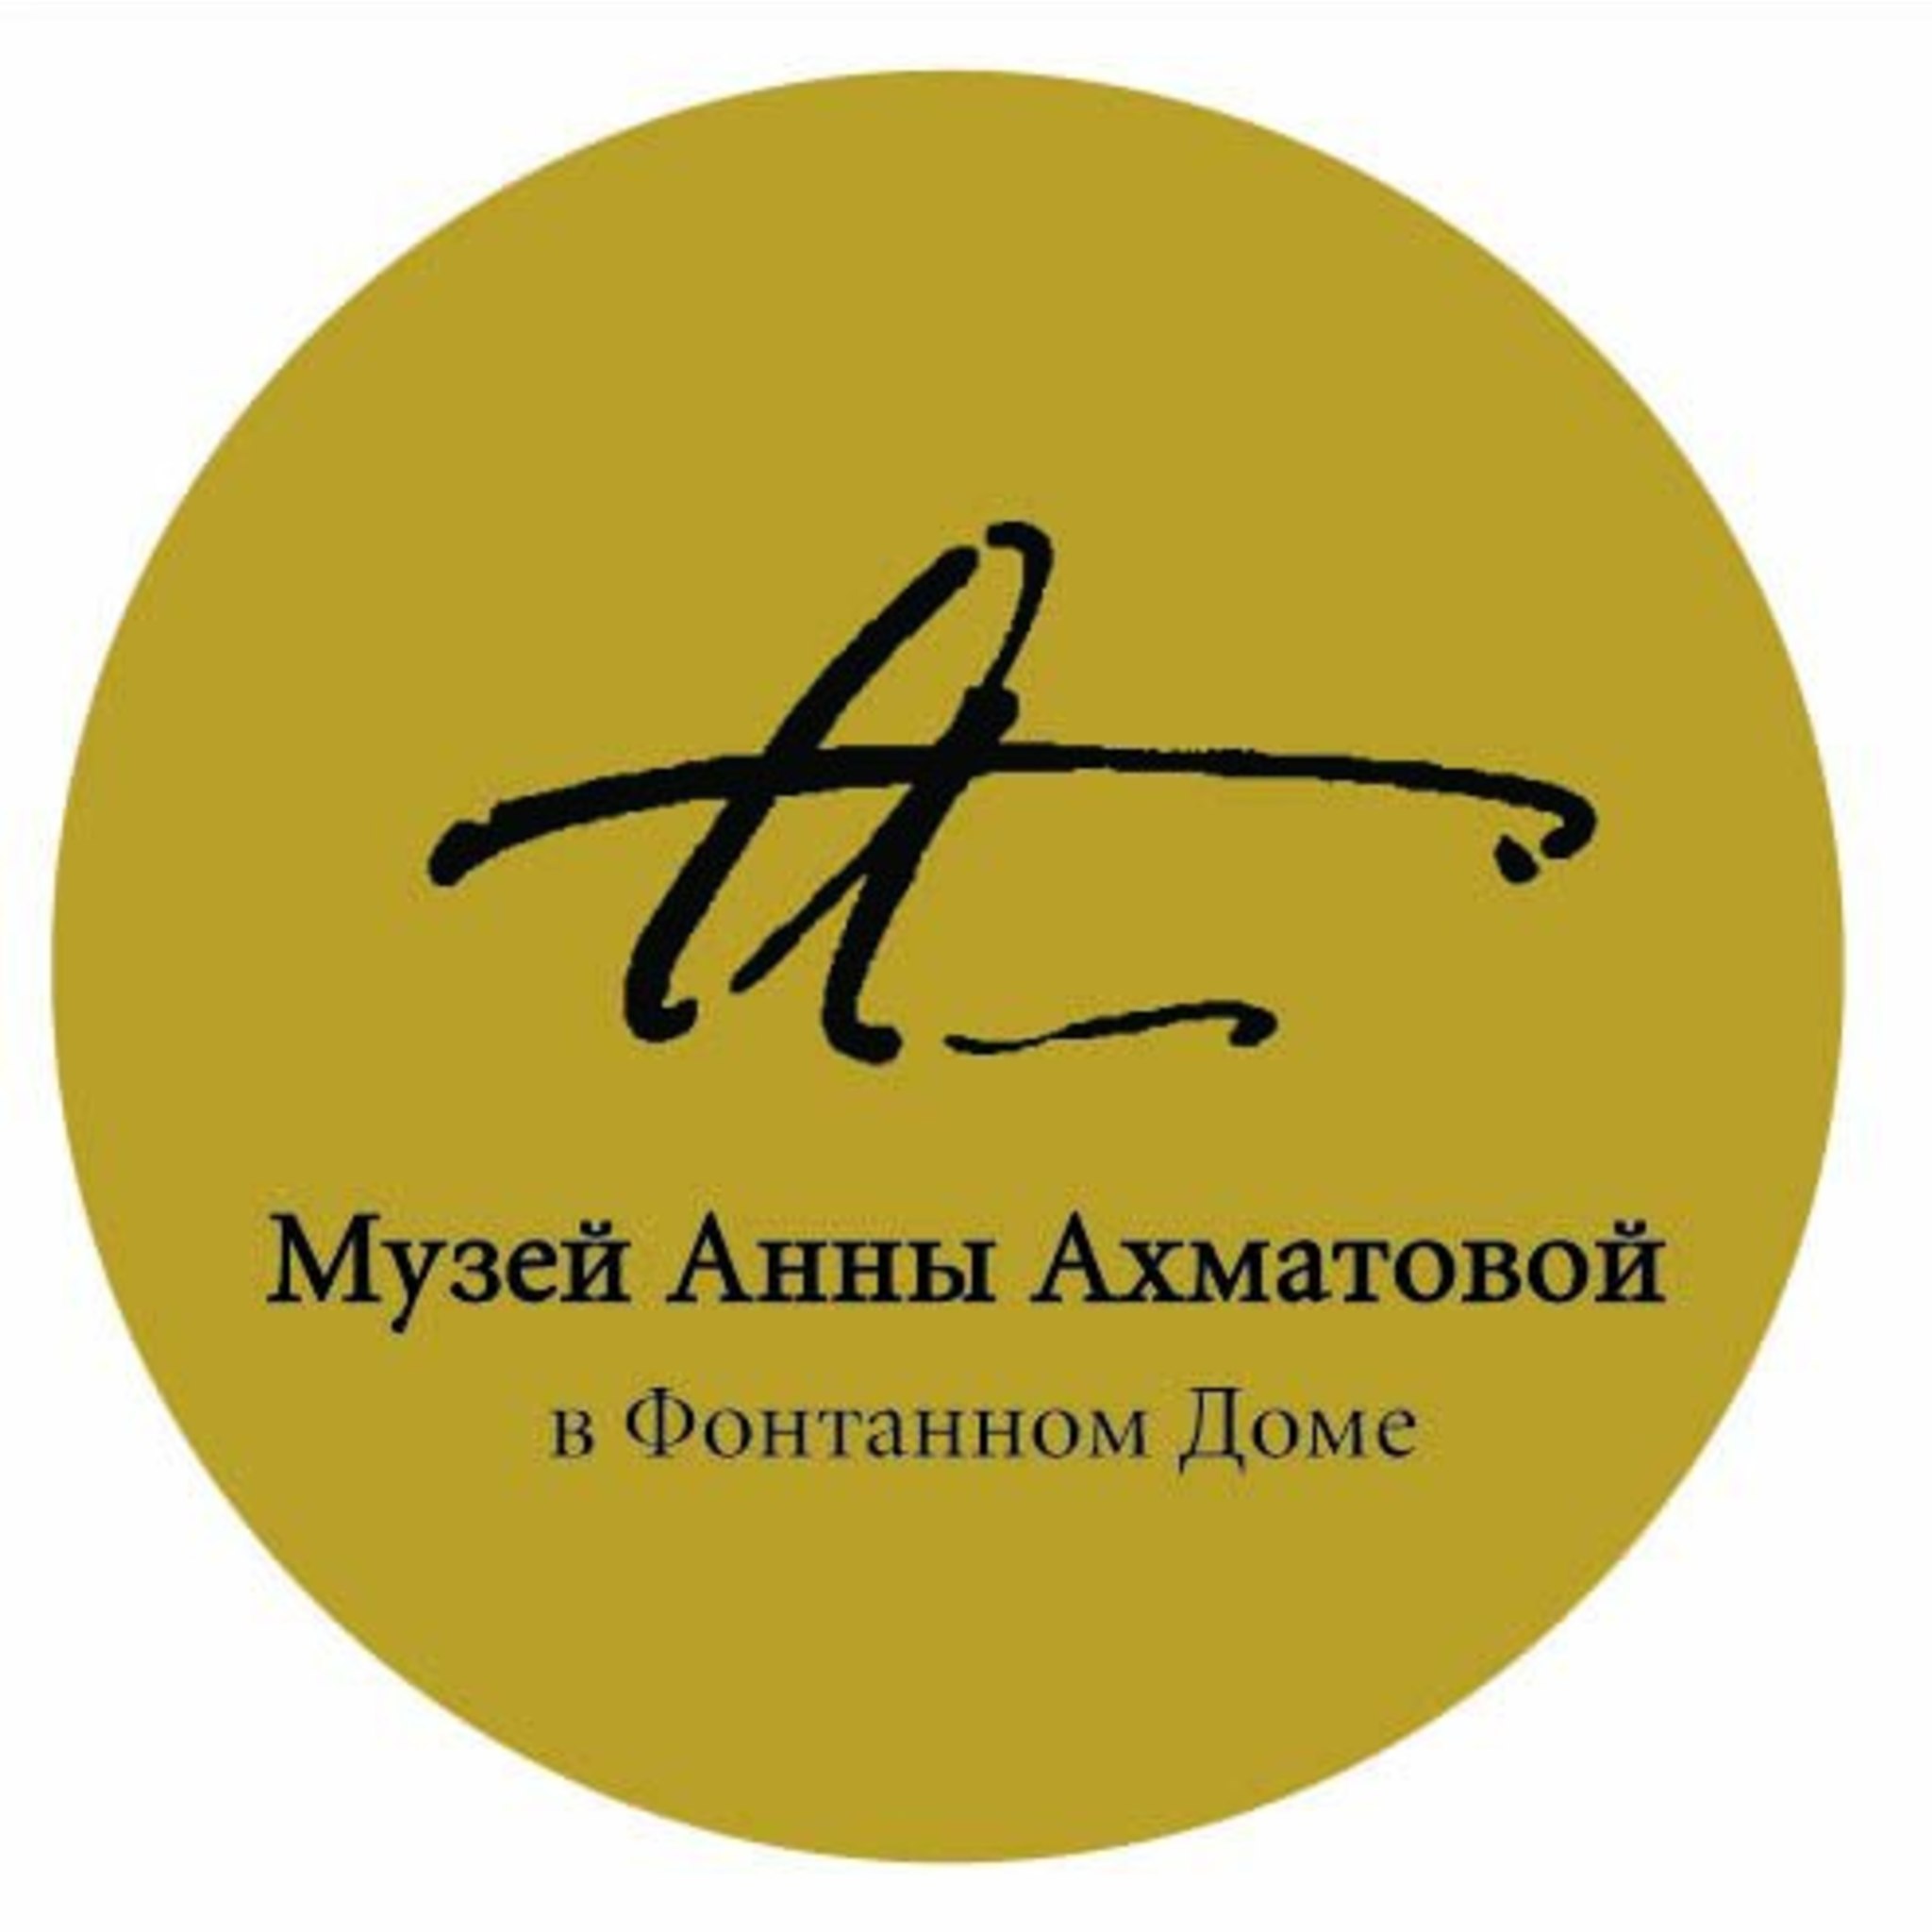 Schedule of events from 26 September to 2 October 2016, Anna Akhmatova Museum at the Fountain House